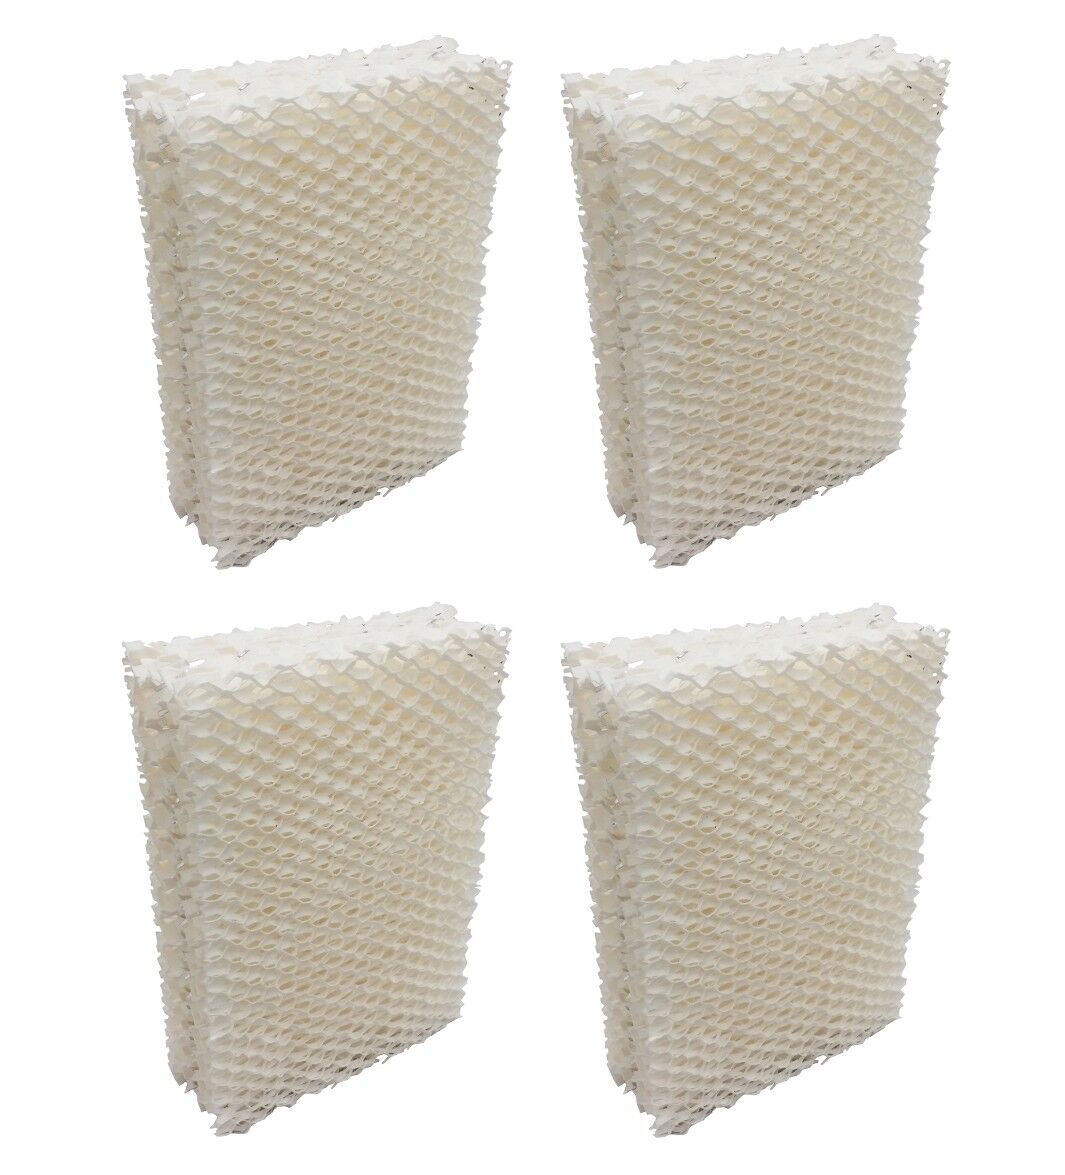 EFP Humidifier Filters for AIRCARE HDC12 Super - 4 PACK